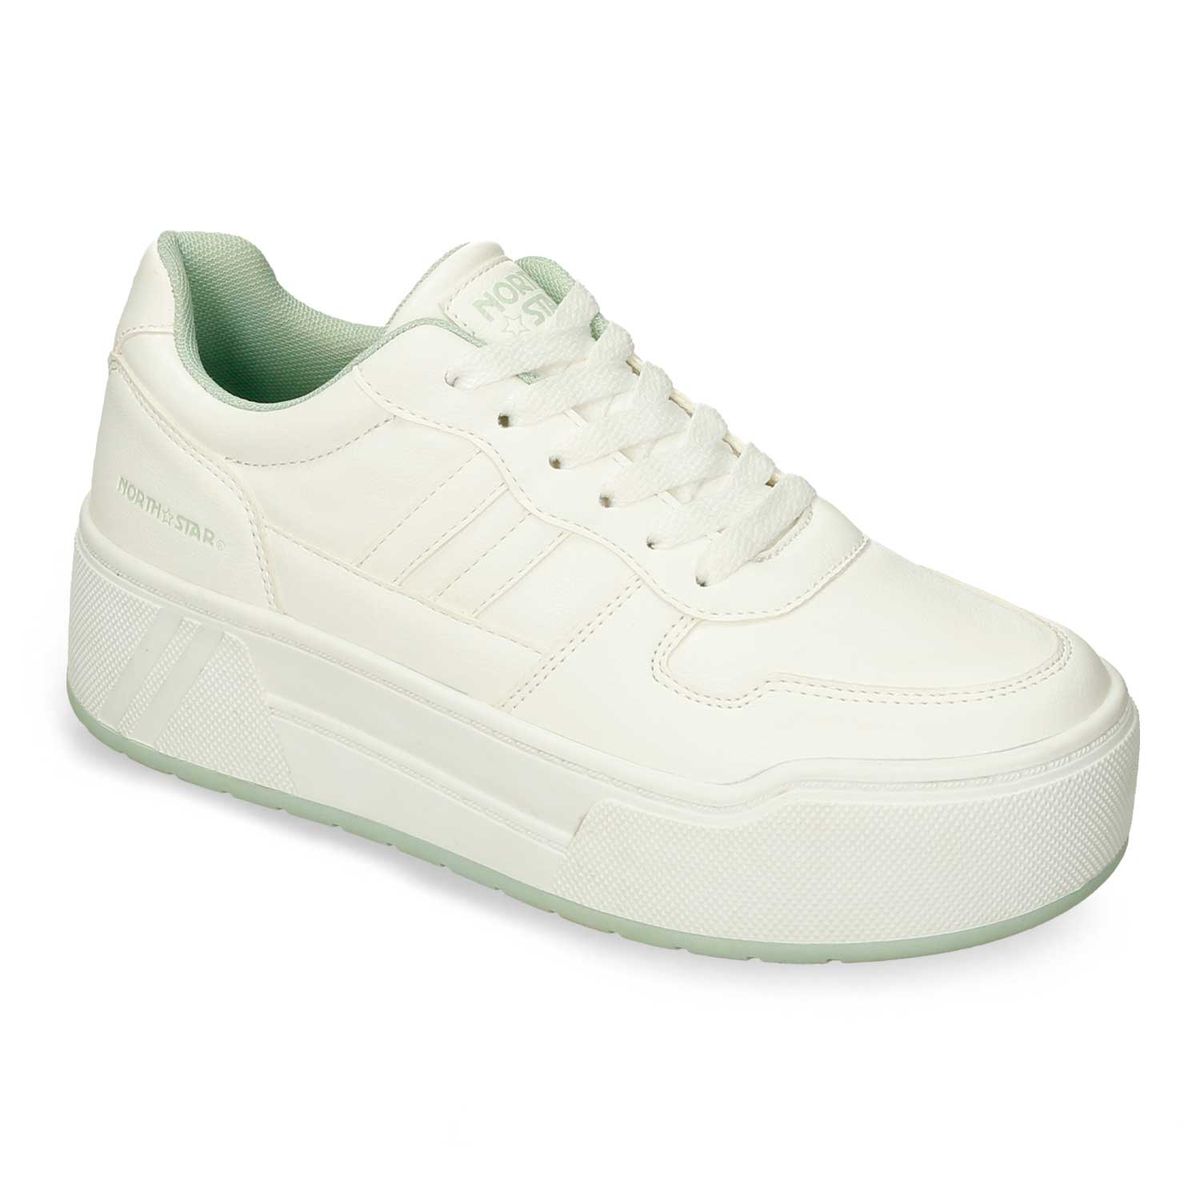 Tenis Casuales Blanco North Star Hollywood Mujer